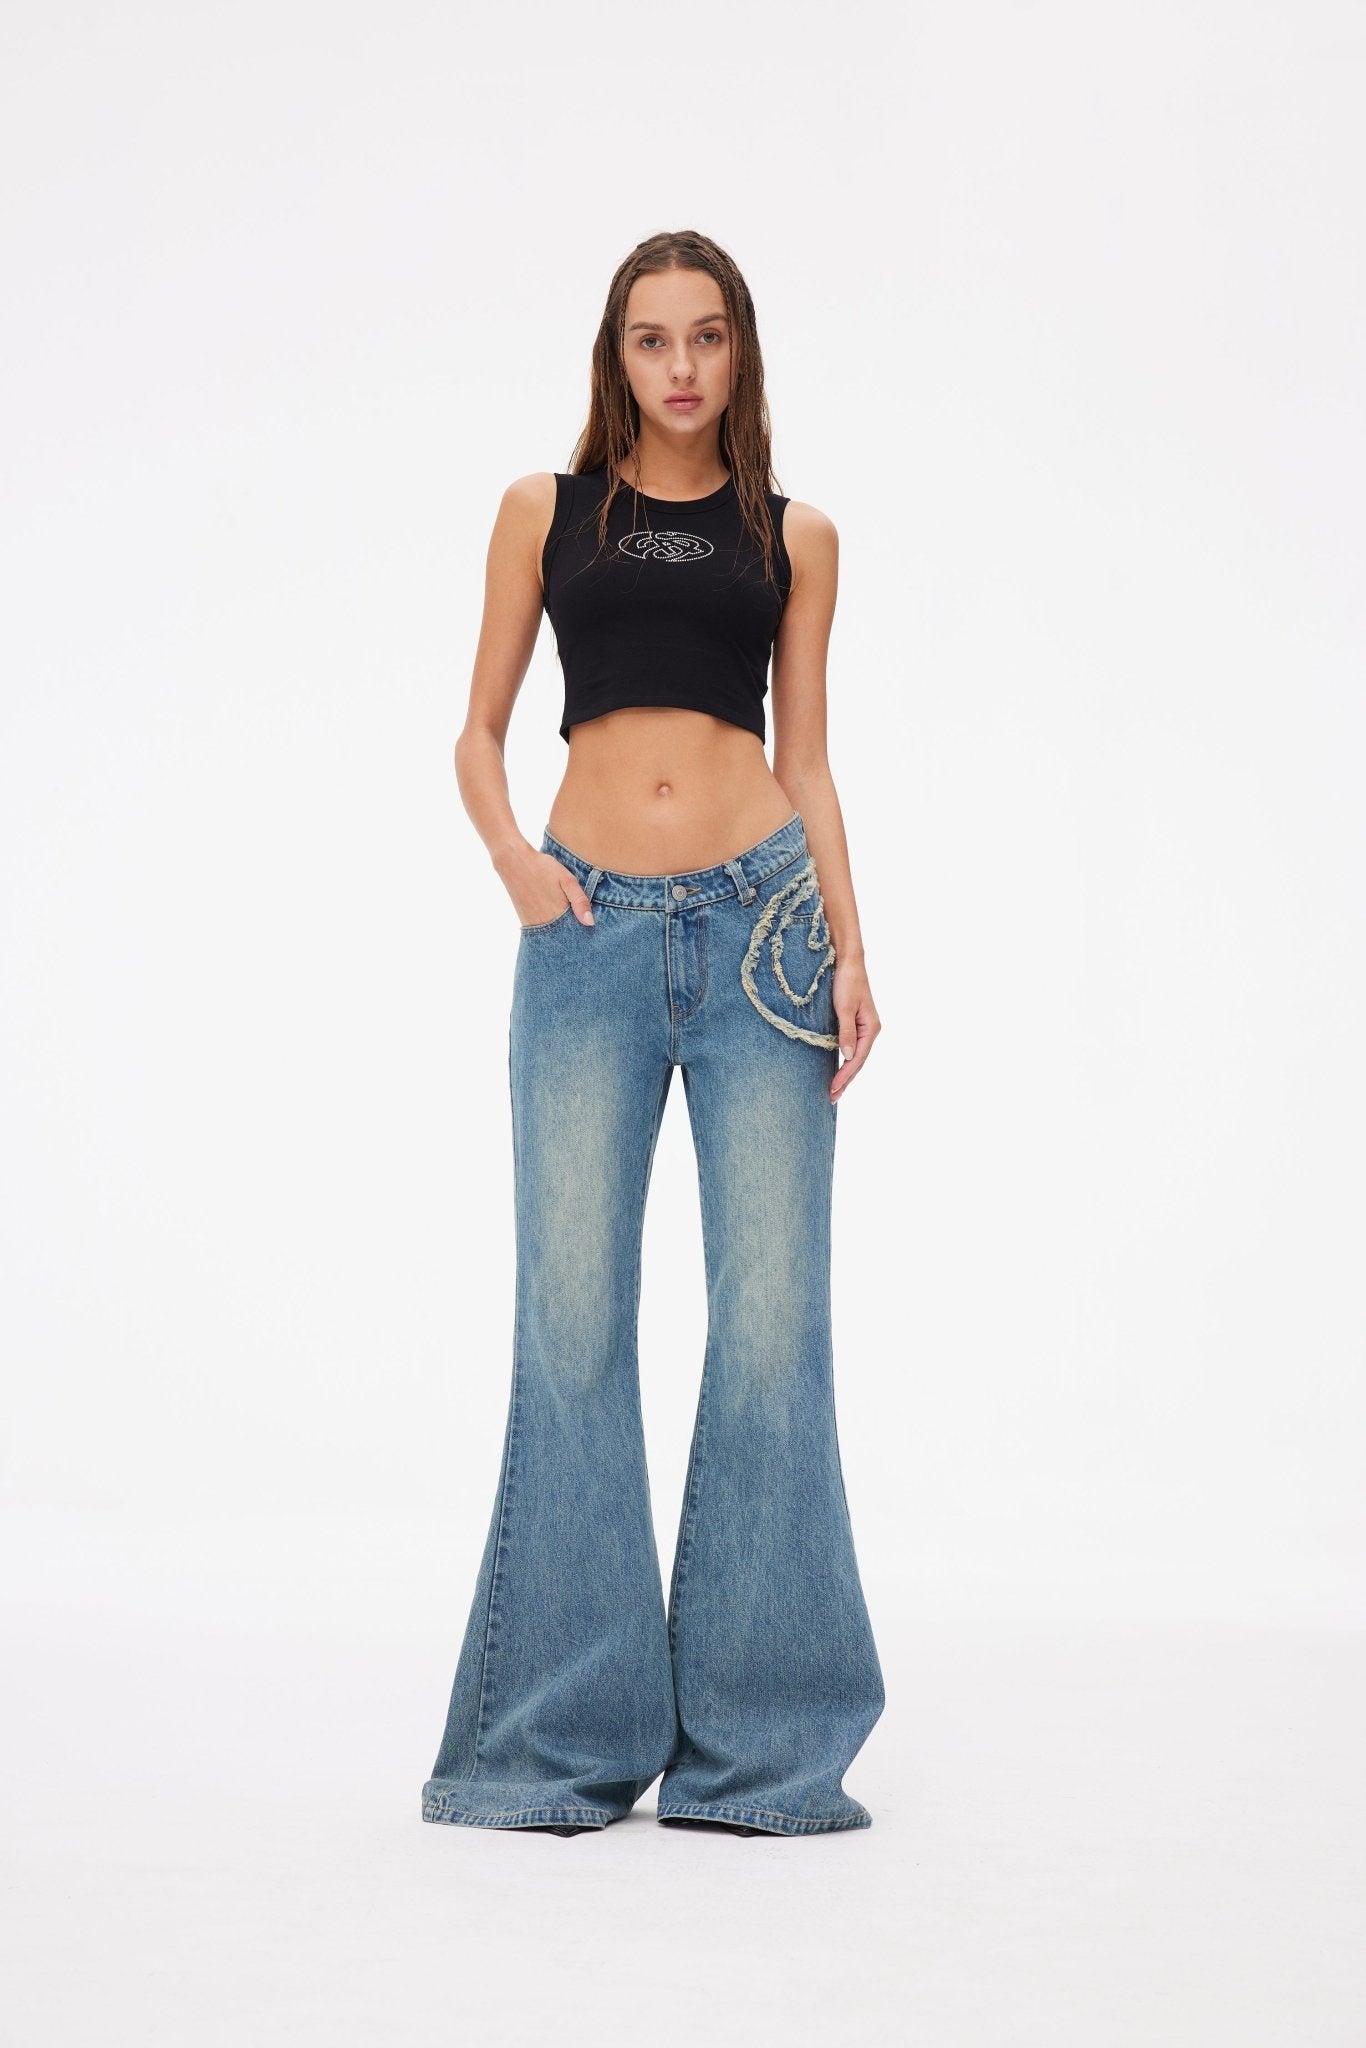 ANN ANDELMAN Bell Bottoms Jeans Blue | MADA IN CHINA